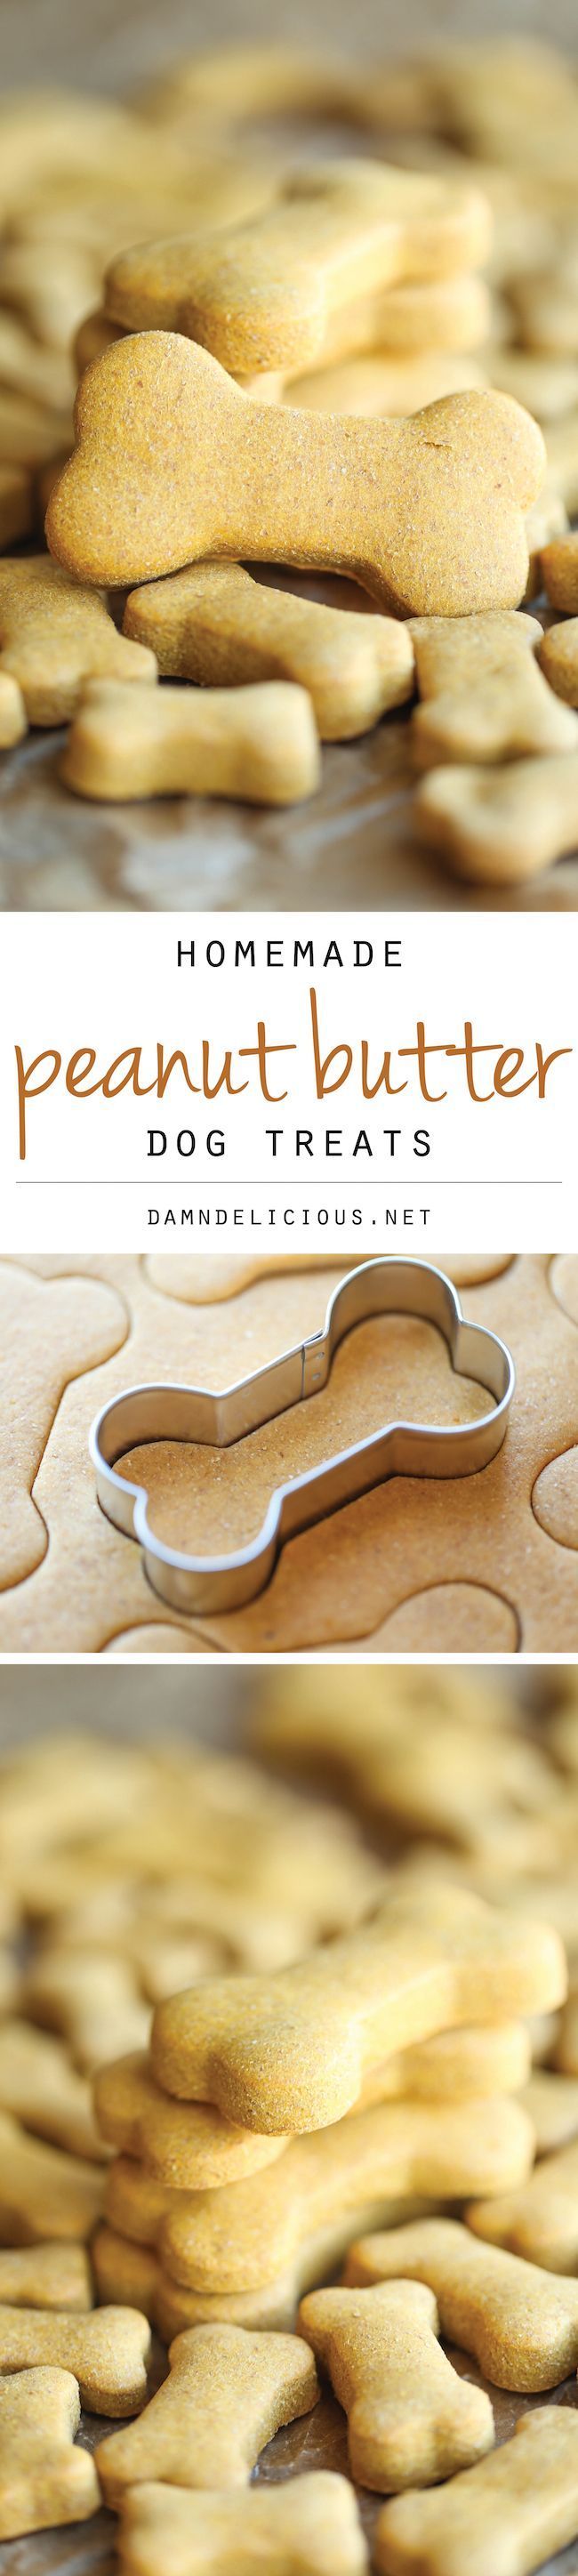 Homemade Peanut Butter Dog Treats – The easiest homemade dog treats ever – simply mix, roll and cut. Easy peasy, and so much